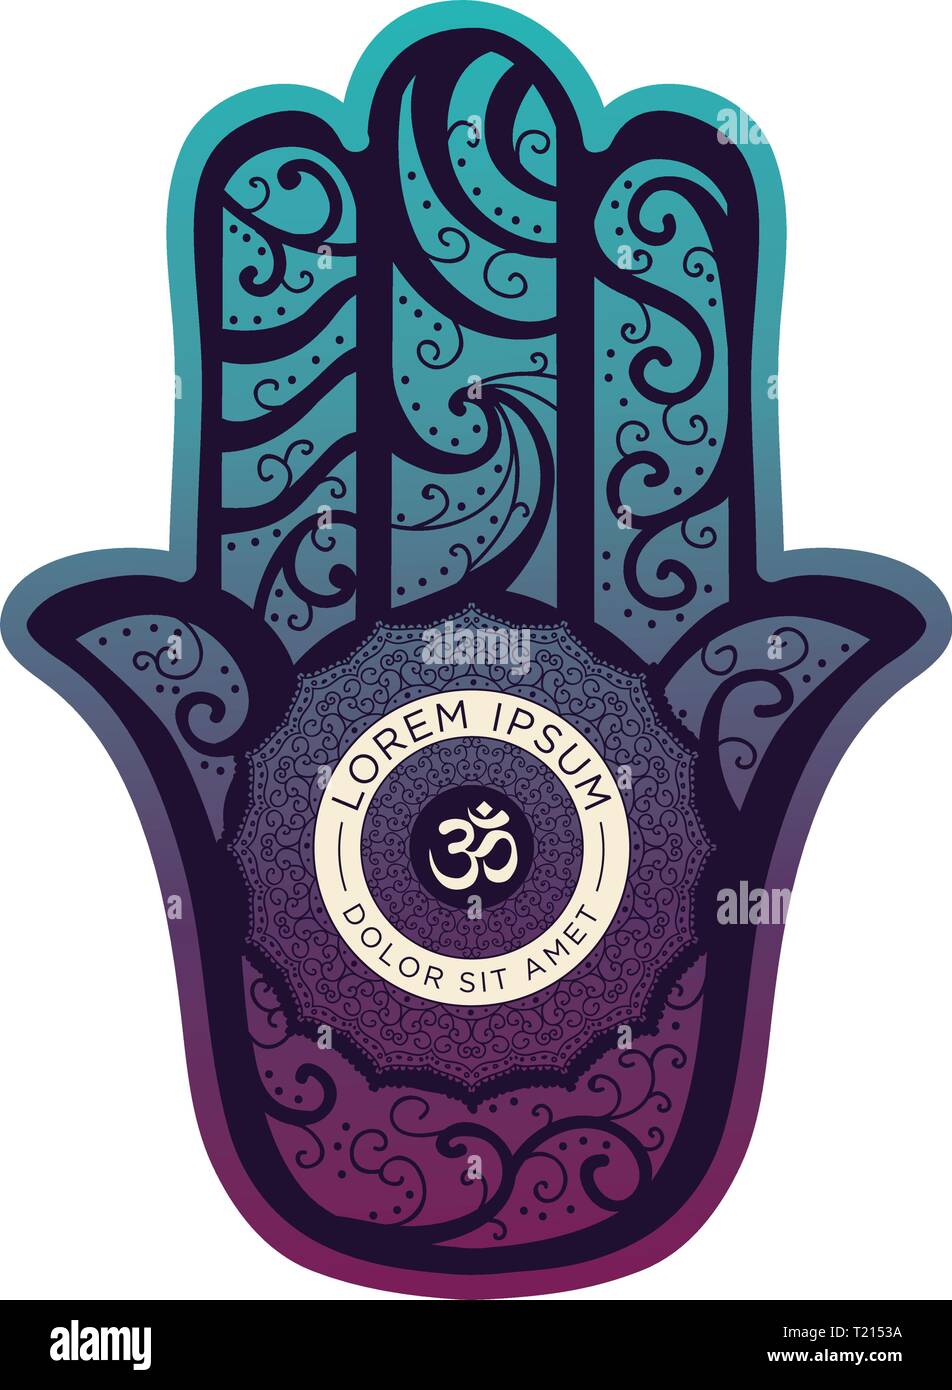 The Hamsa Hand, Ancient Middle Eastern amulet symbolizing the Hand of God. Stock Vector